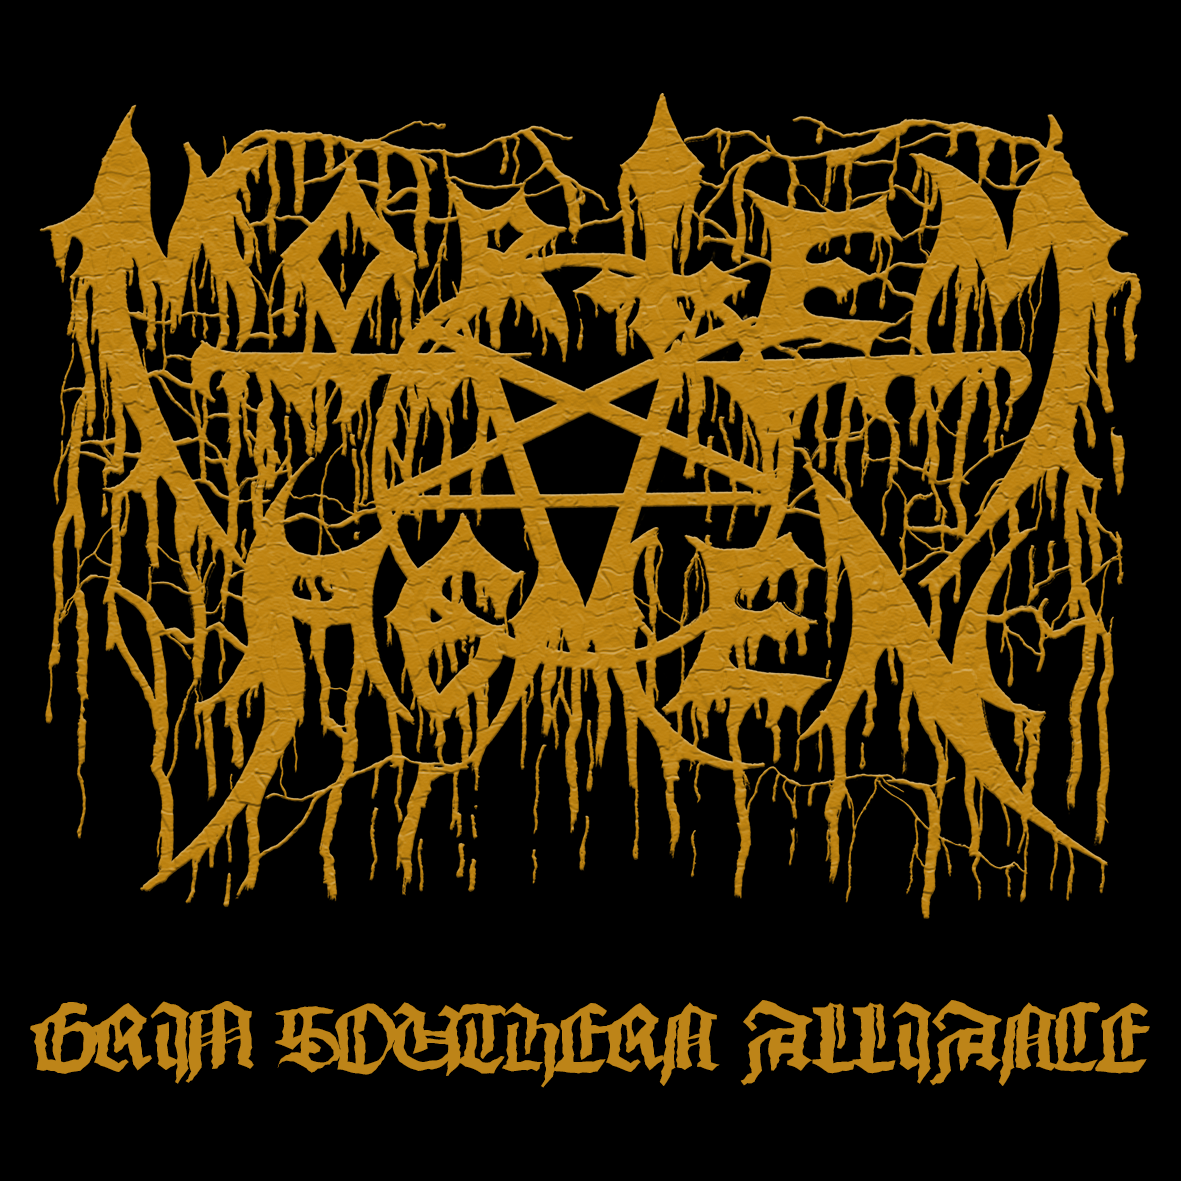 Mortem Agmen - The Path to the Abyss of Evil | CD bundle | Limited to 25 copies! 